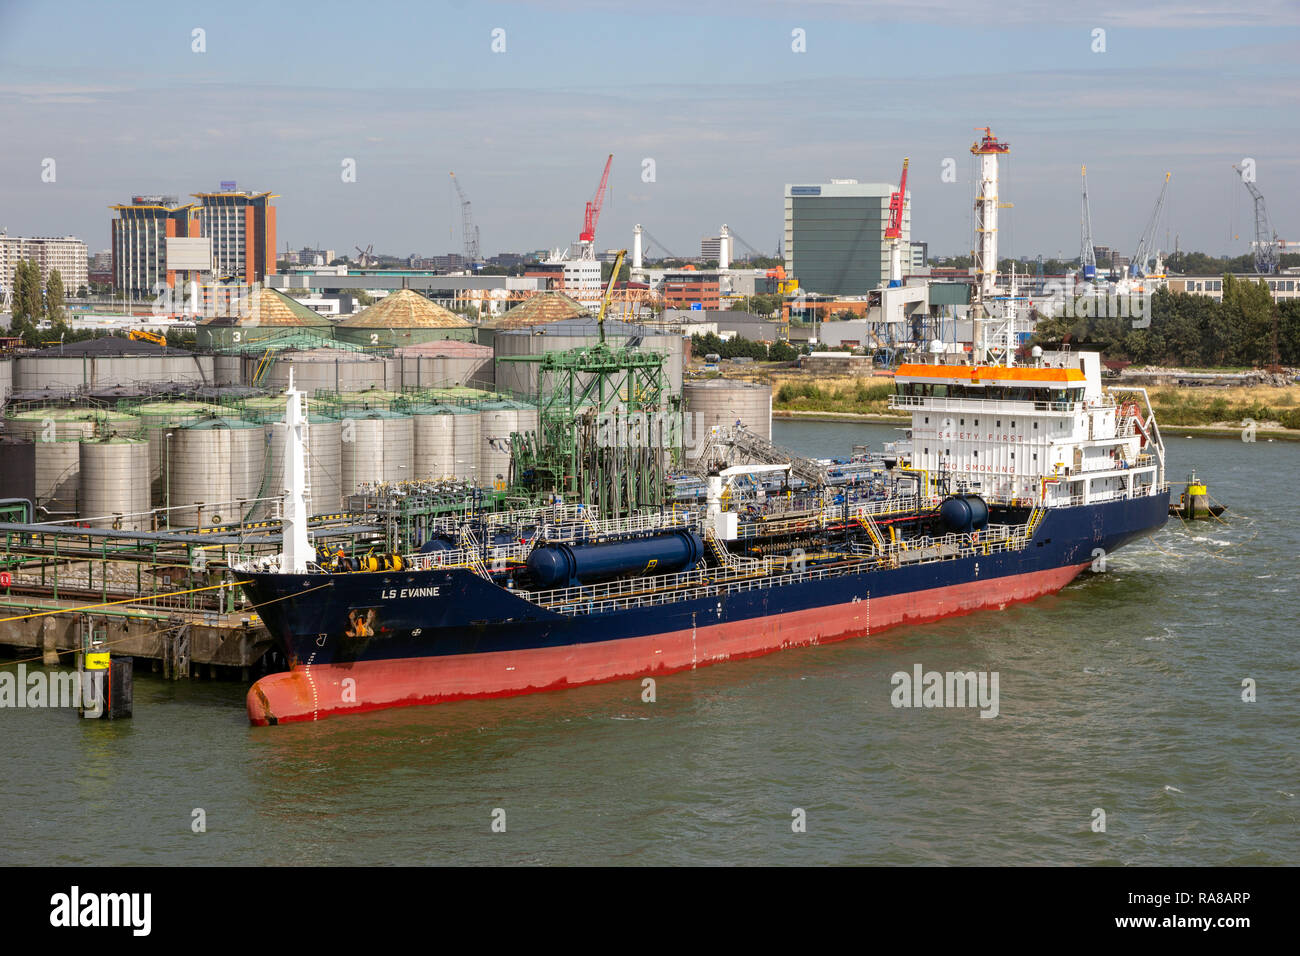 ROTTERDAM, THE NETHERLANDS - SEP 9, 2018: Oil tanker moored at the Vopak tank terminal in the Port of Rotterdam. Stock Photo